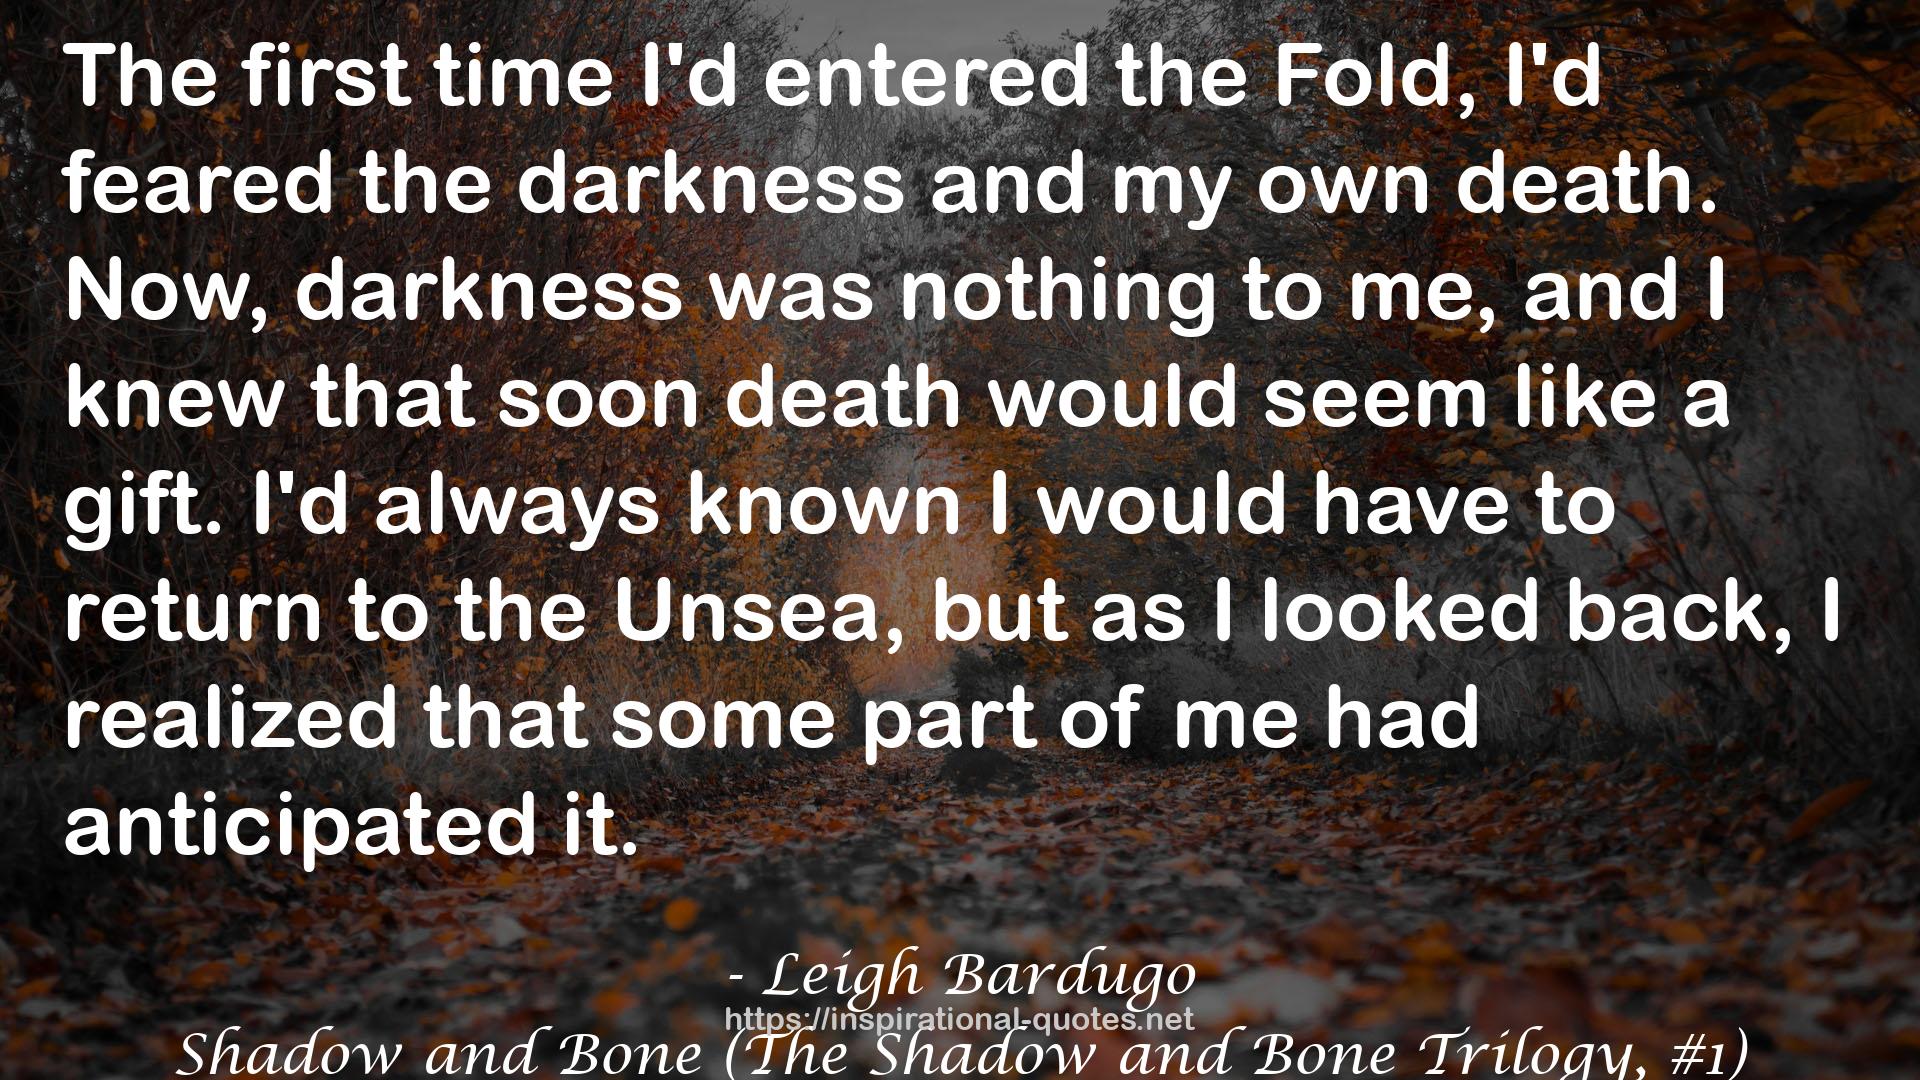 Shadow and Bone (The Shadow and Bone Trilogy, #1) QUOTES